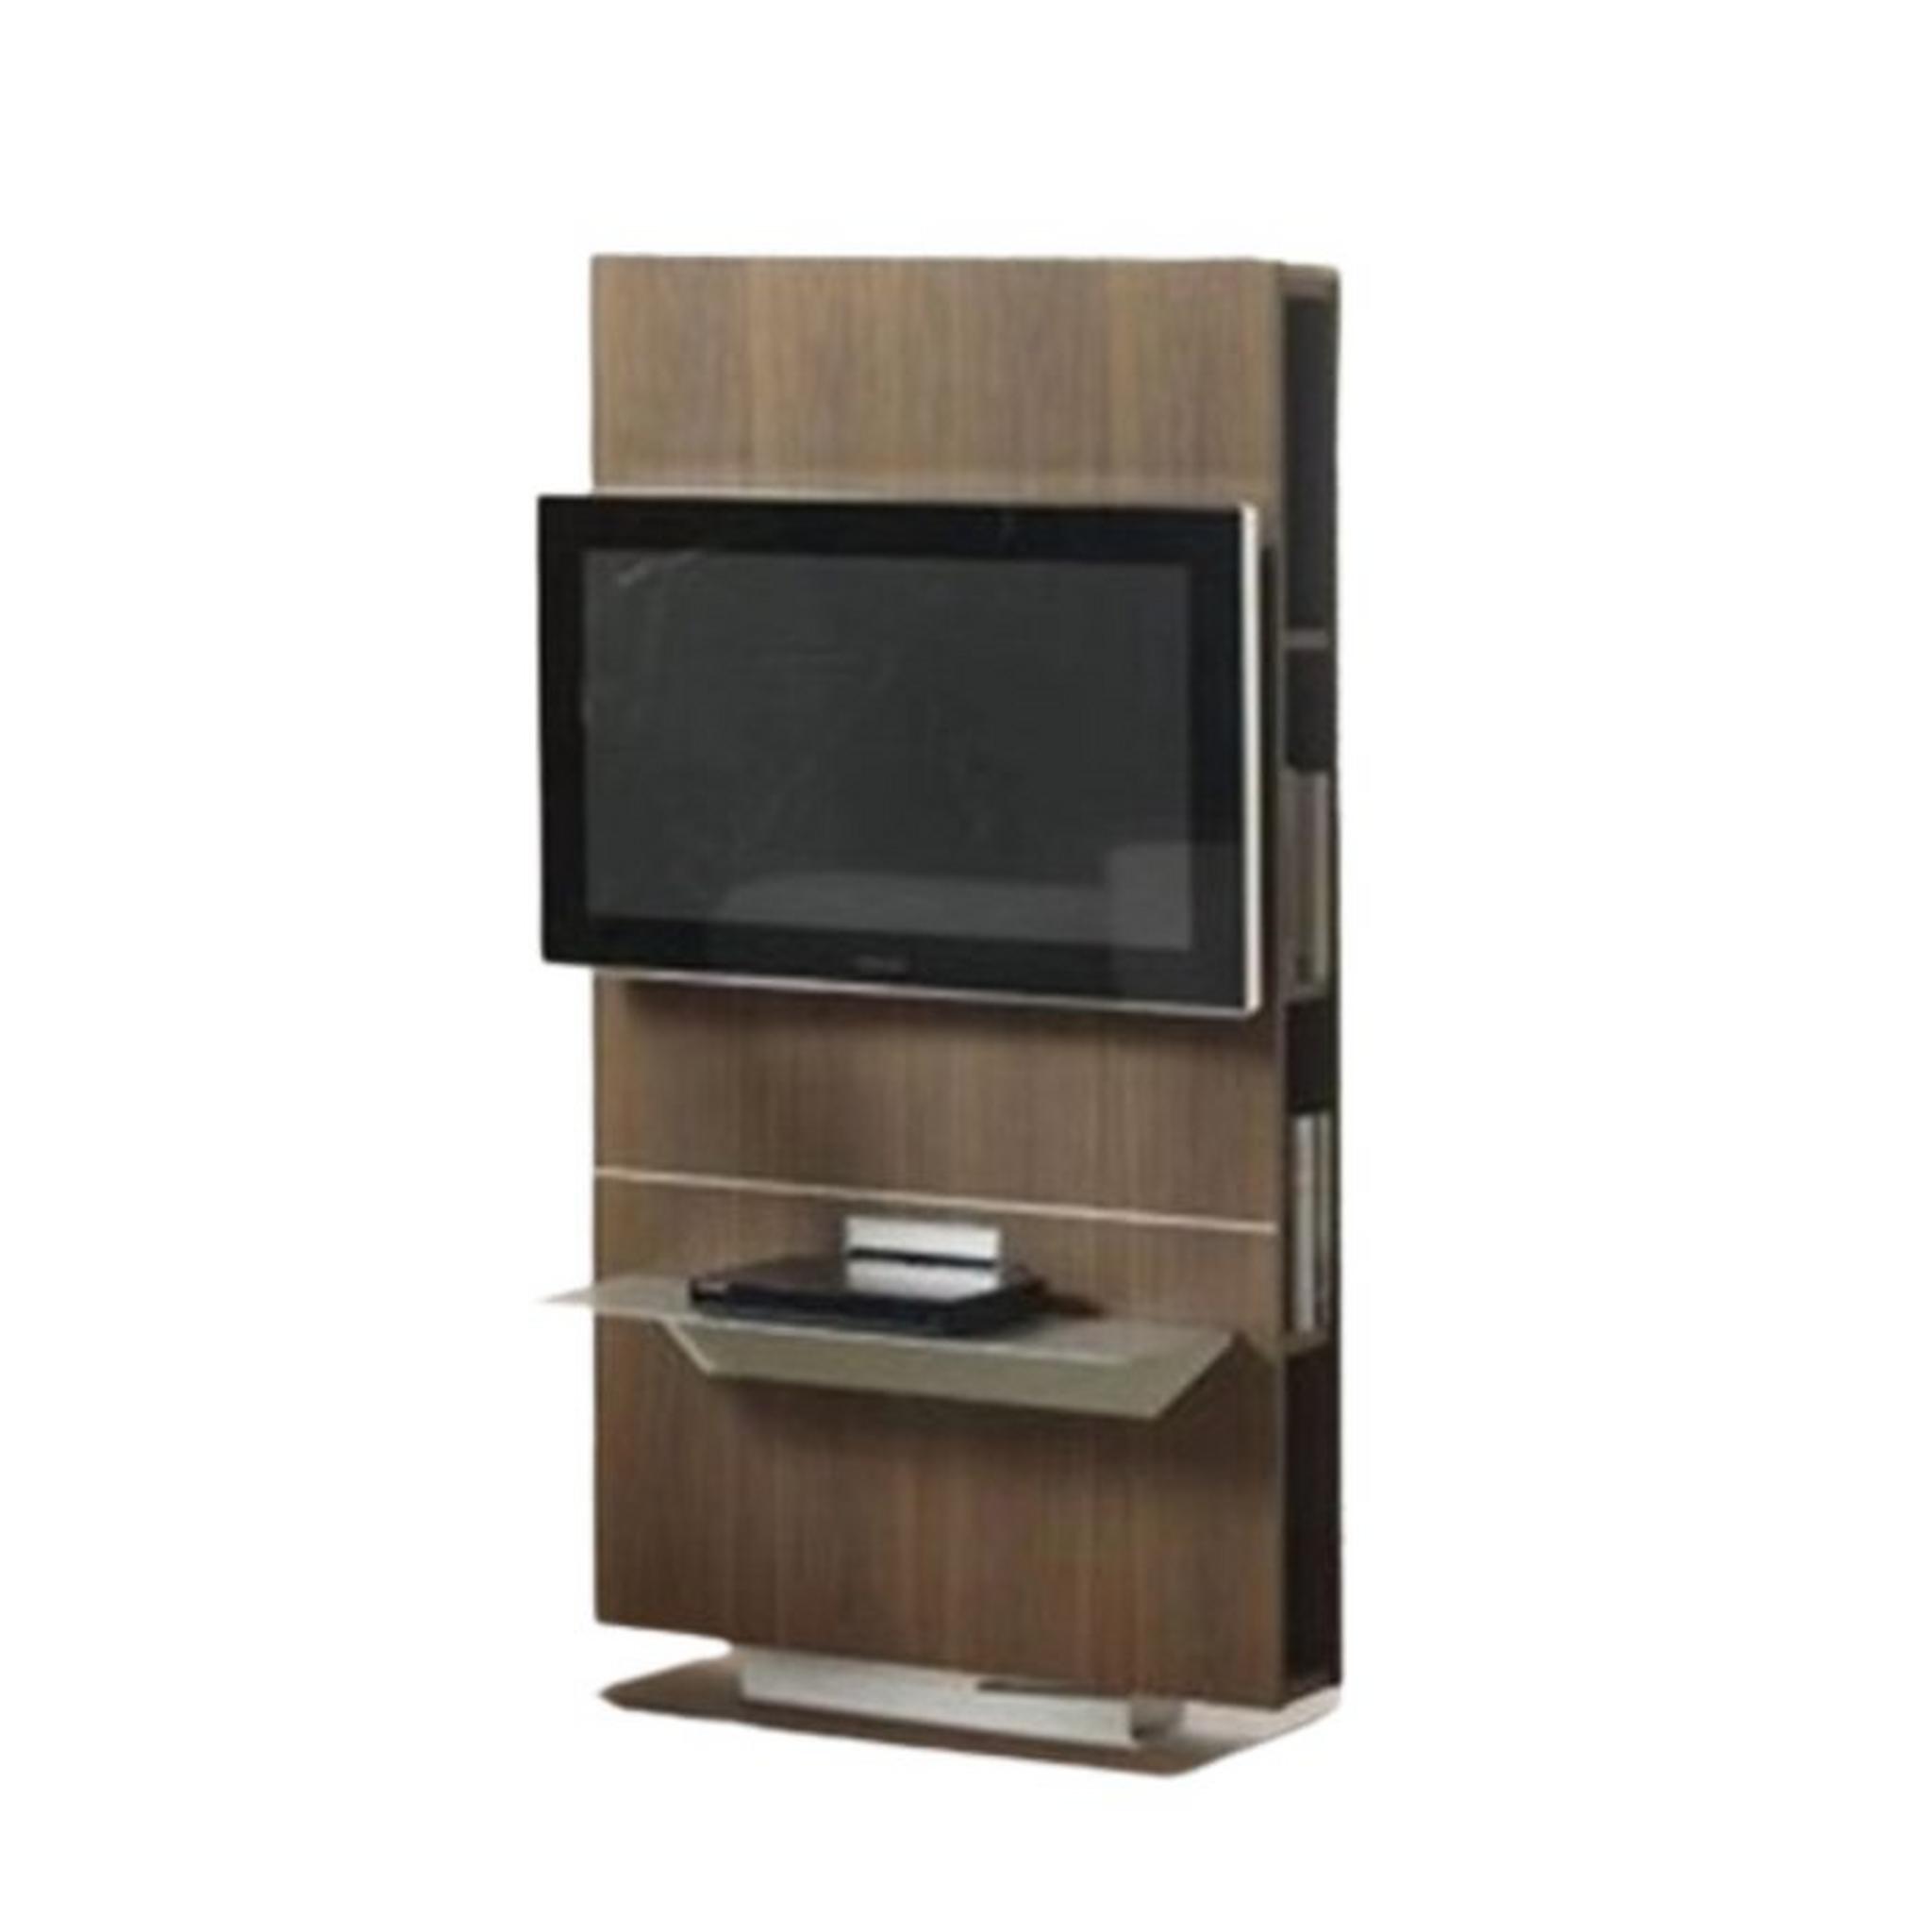 Wansa TV Stand up to 65 inches, 60 Kg, KS-TW-0244